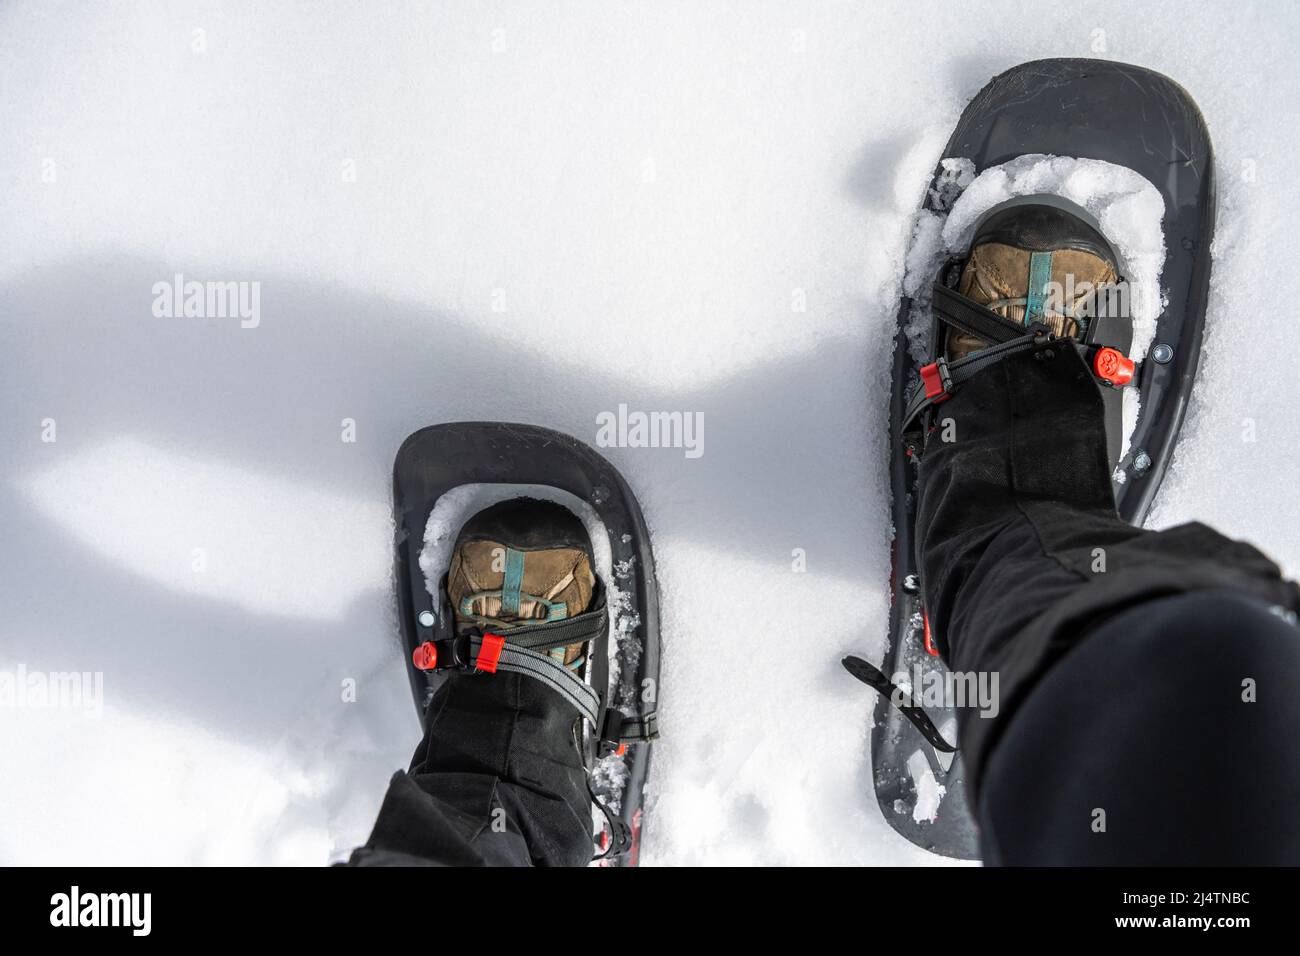 point of view image of a person walking in snowshoes Stock Photo